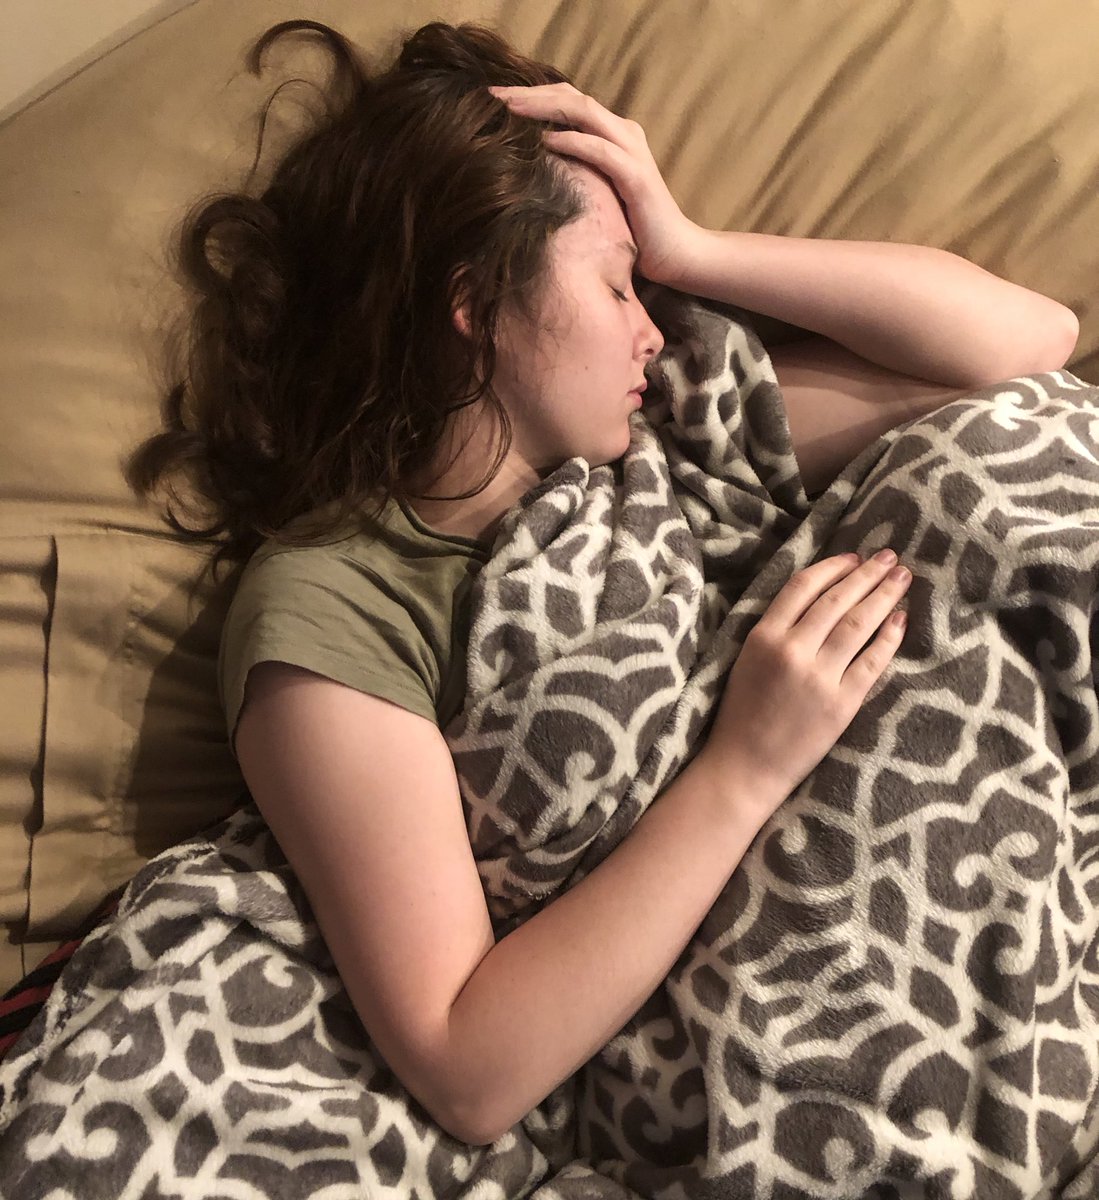 This is my 19 year old daughter Rosie. Today marks 2 weeks that she has been the sickest in her entire life. She is positive for Covid-19. We haven’t seen a many experiences shared of what this illness has been like for healthy young adults, so here’s a thread